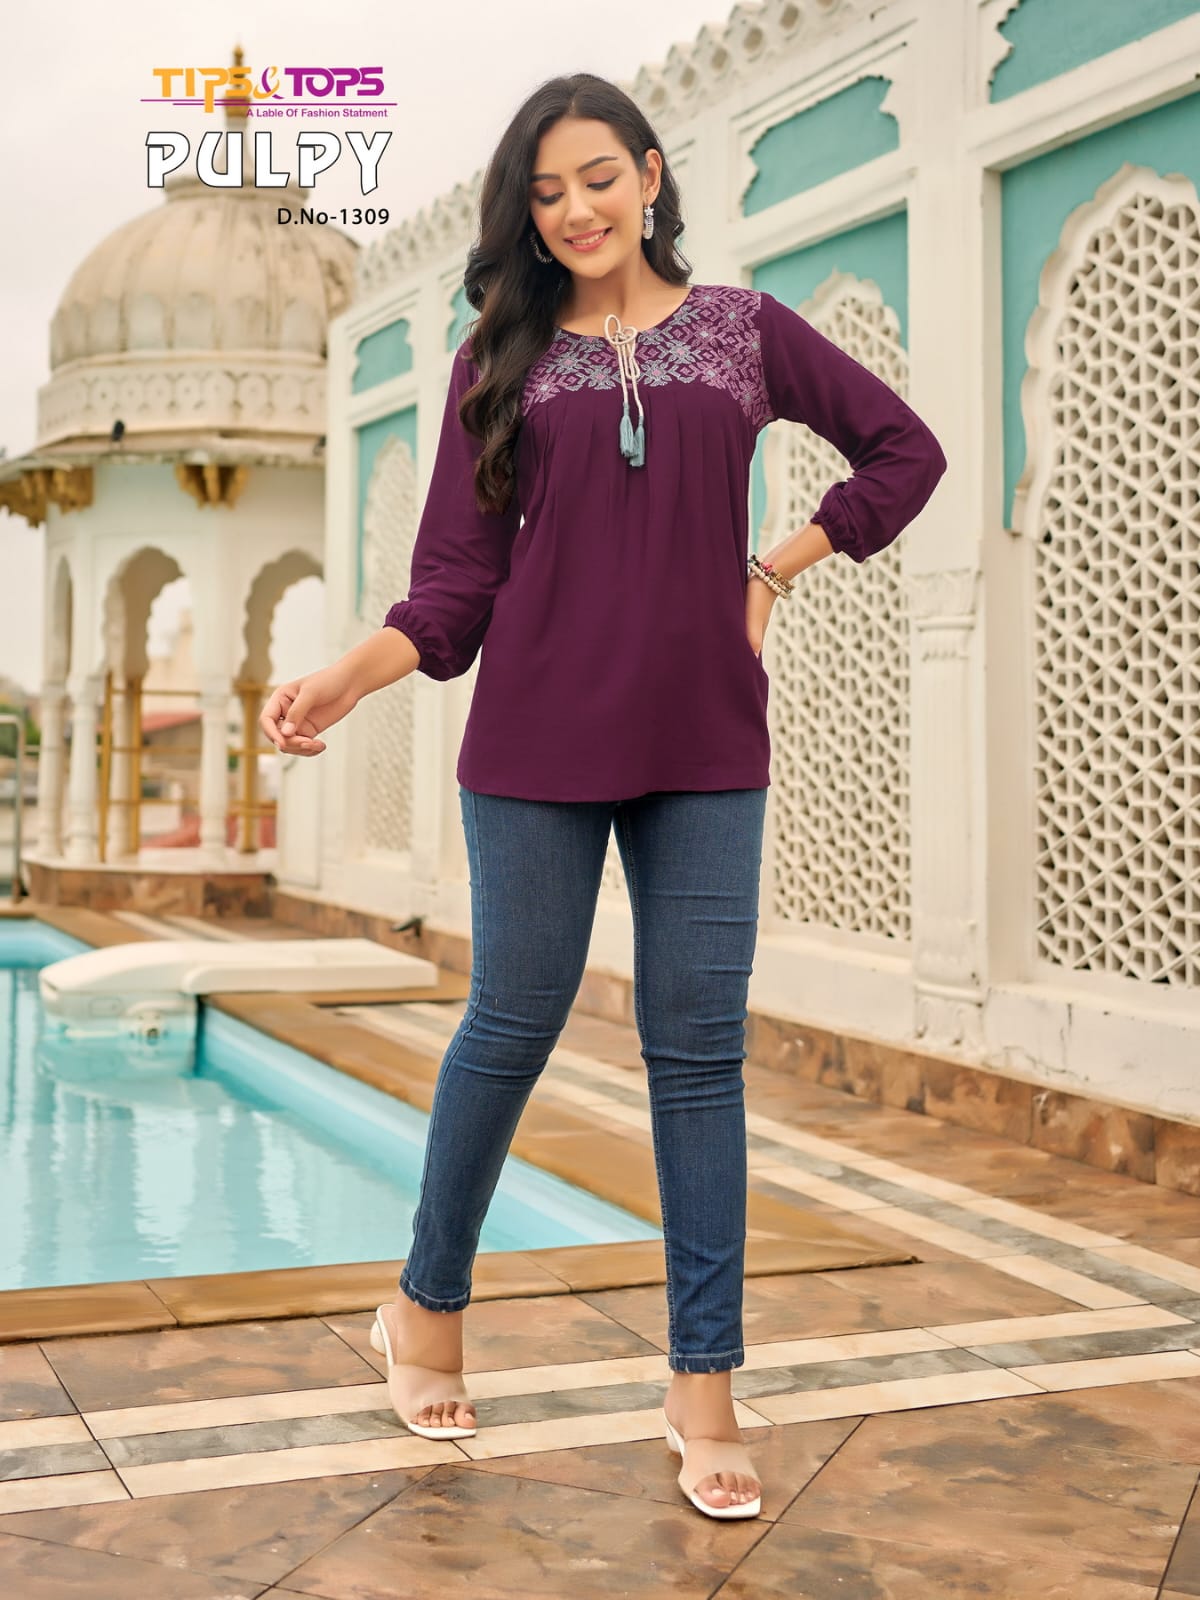 Tips Tops Pulpy Vol 13 Ladies Tops Catalog collection 4